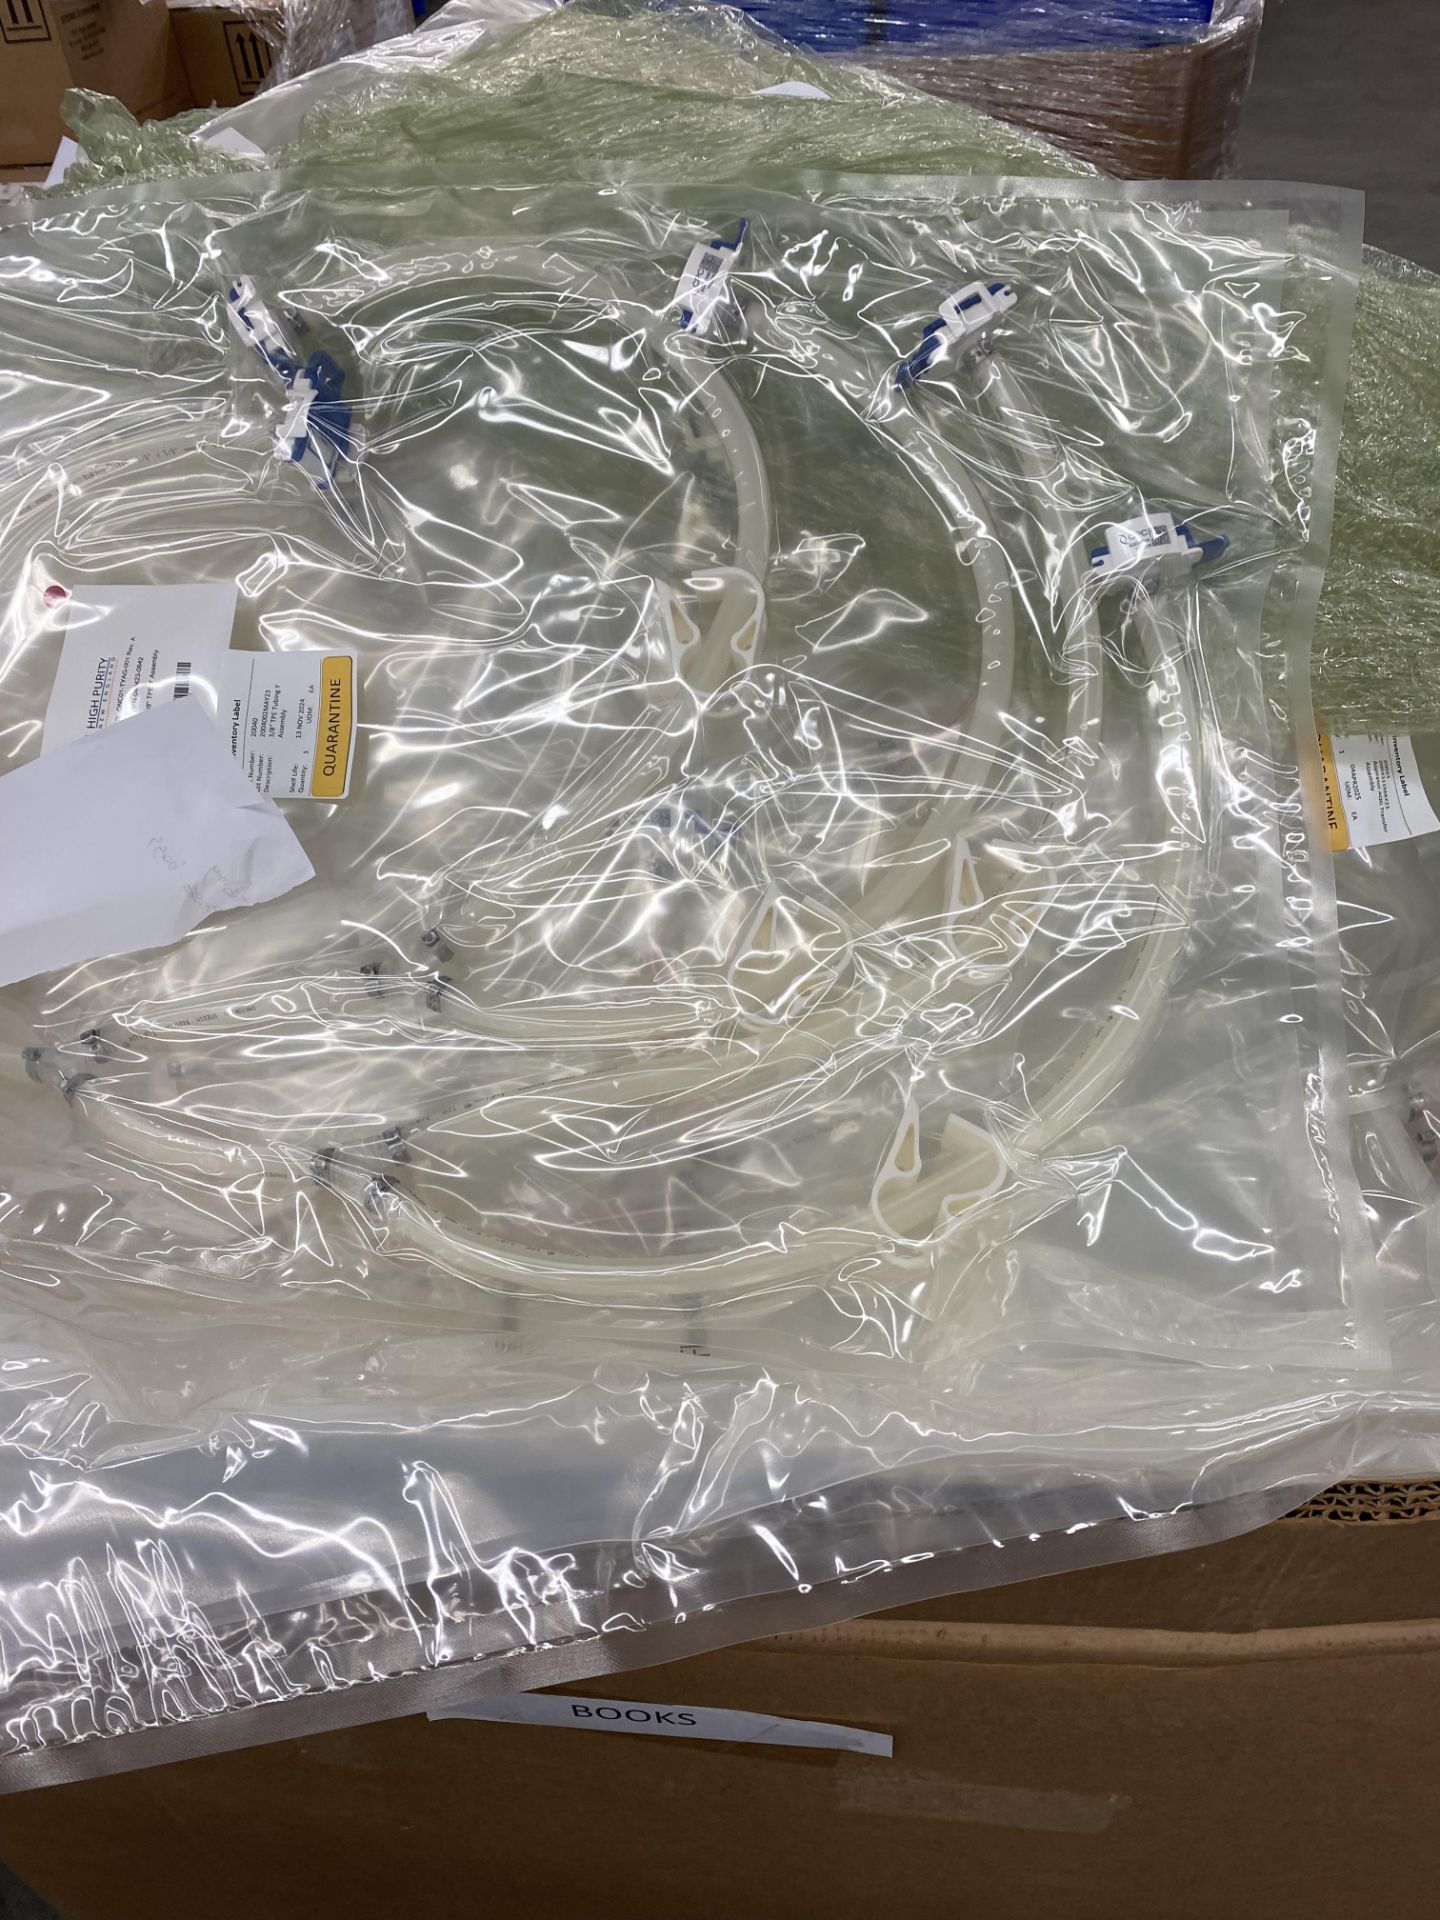 {LOT} Of Consumables on Pallet in Large Box/Gaylord c/o: High Purity TPE Tubing, Sartorius Stedim - Image 2 of 3